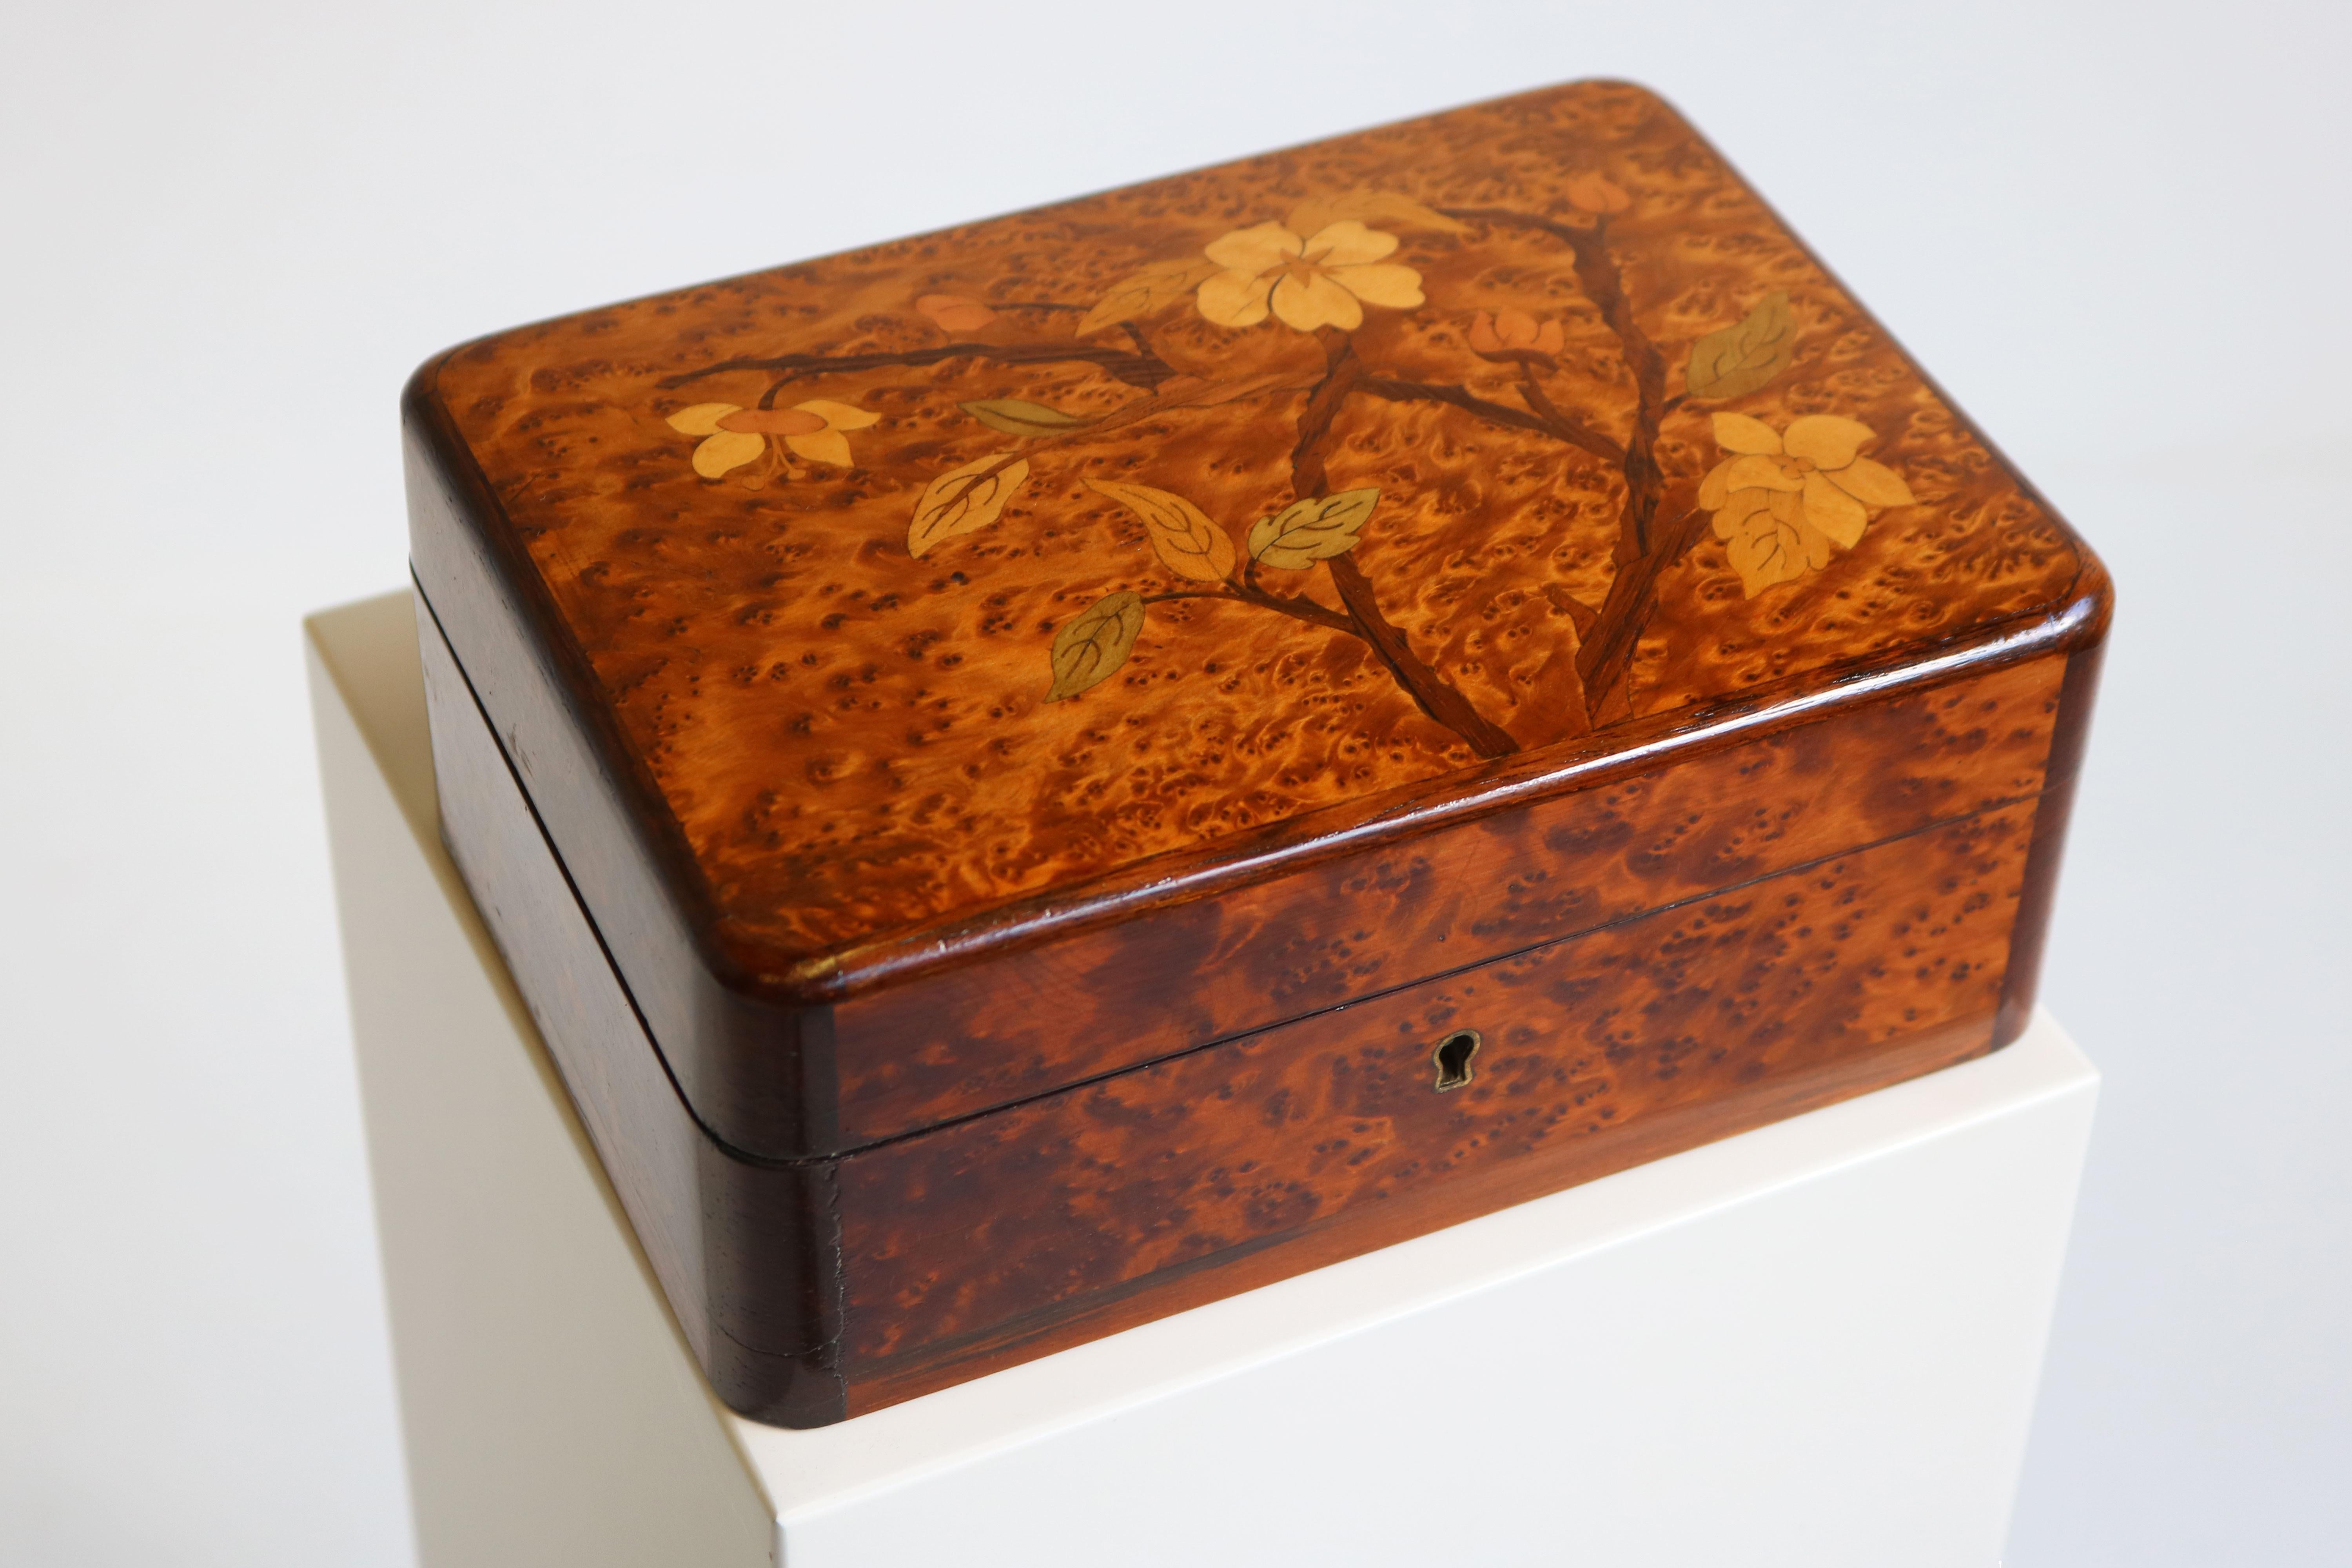 Early 20th Century Antique French Art Nouveau / Jugendstil Jewelry Box in Burl Wood & Floral Inlay